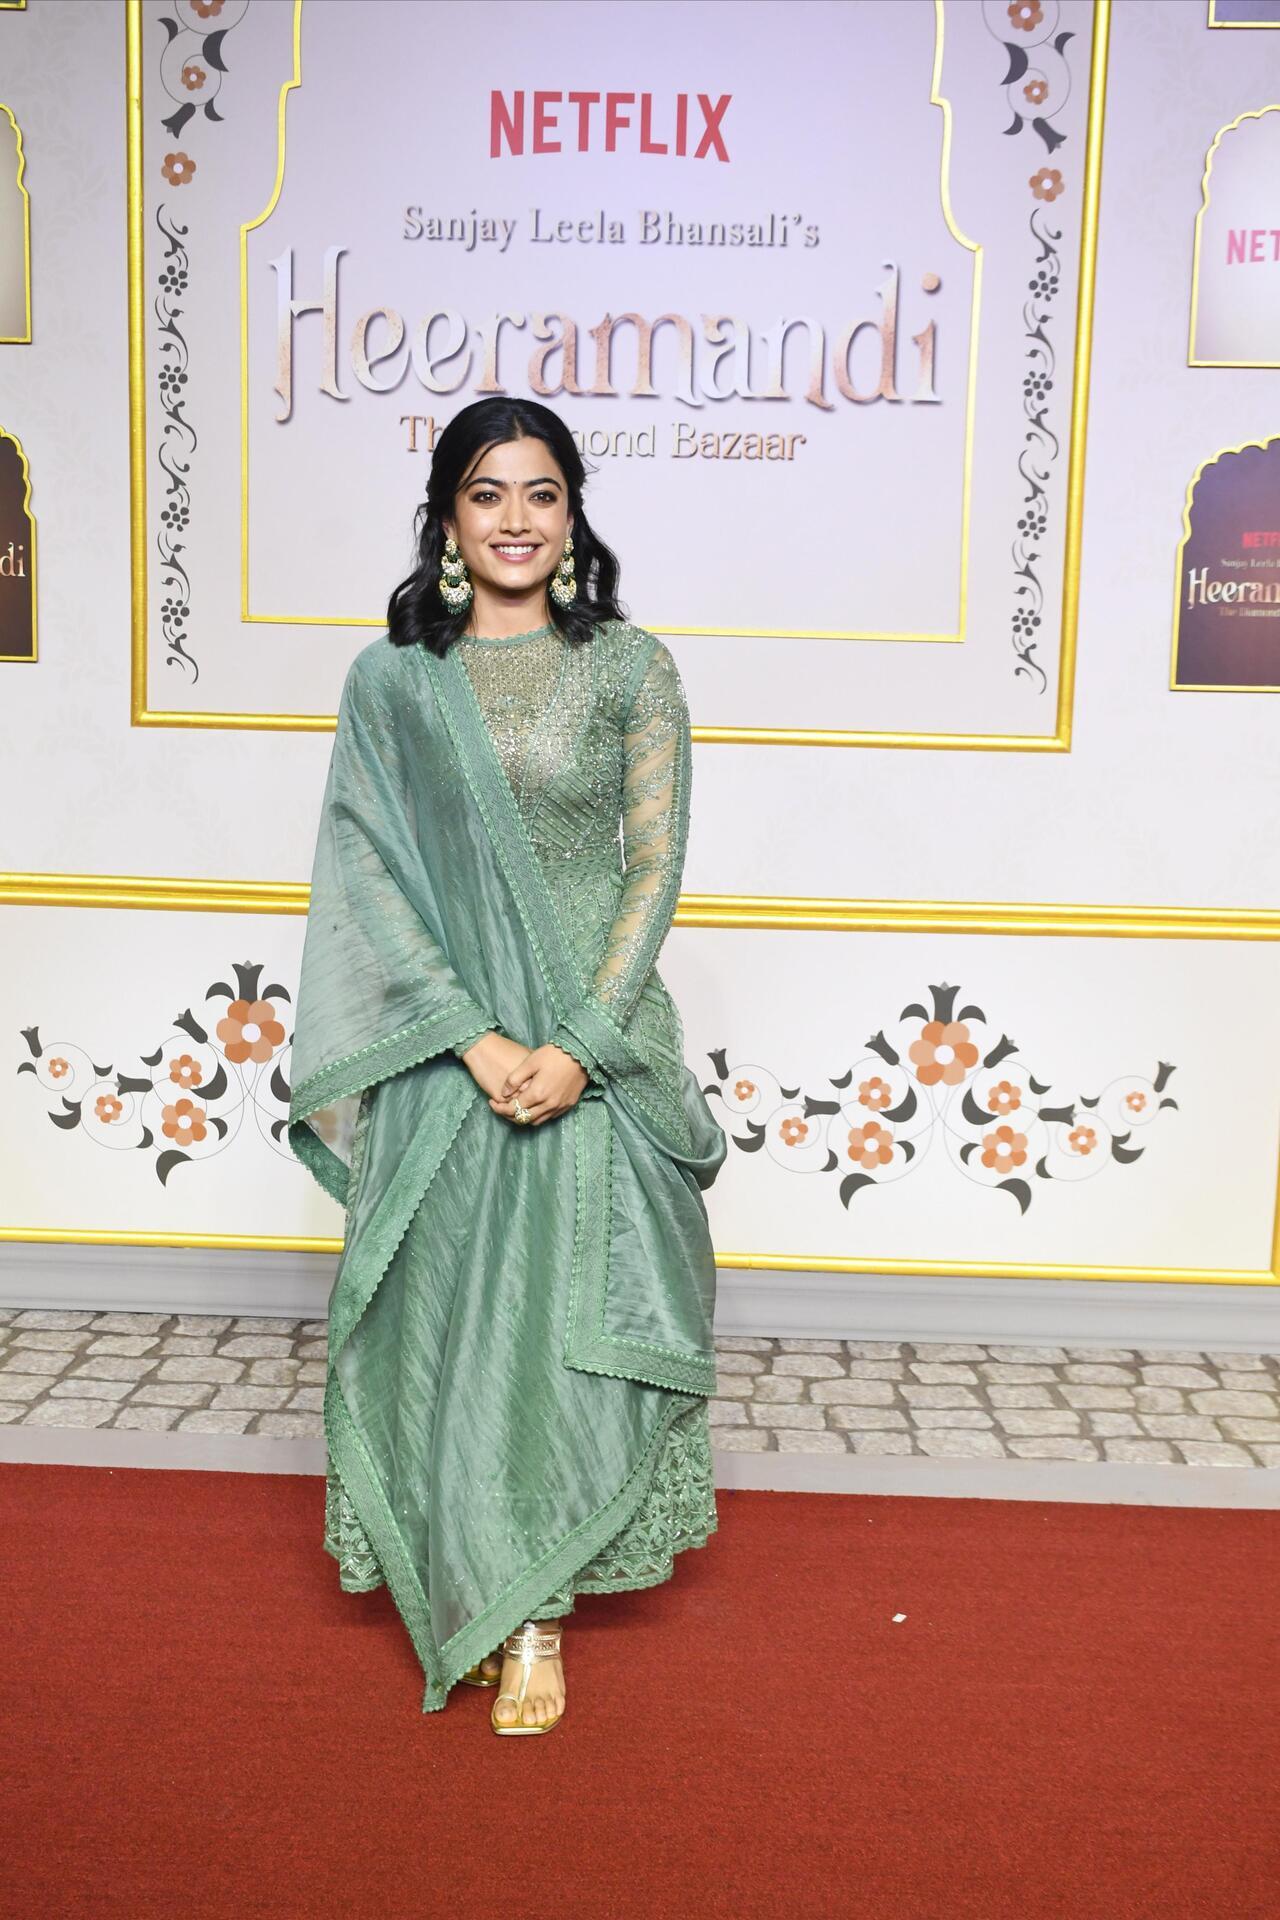 Rashmika Mandanna looked stunning in a green anarkali suit for the premiere